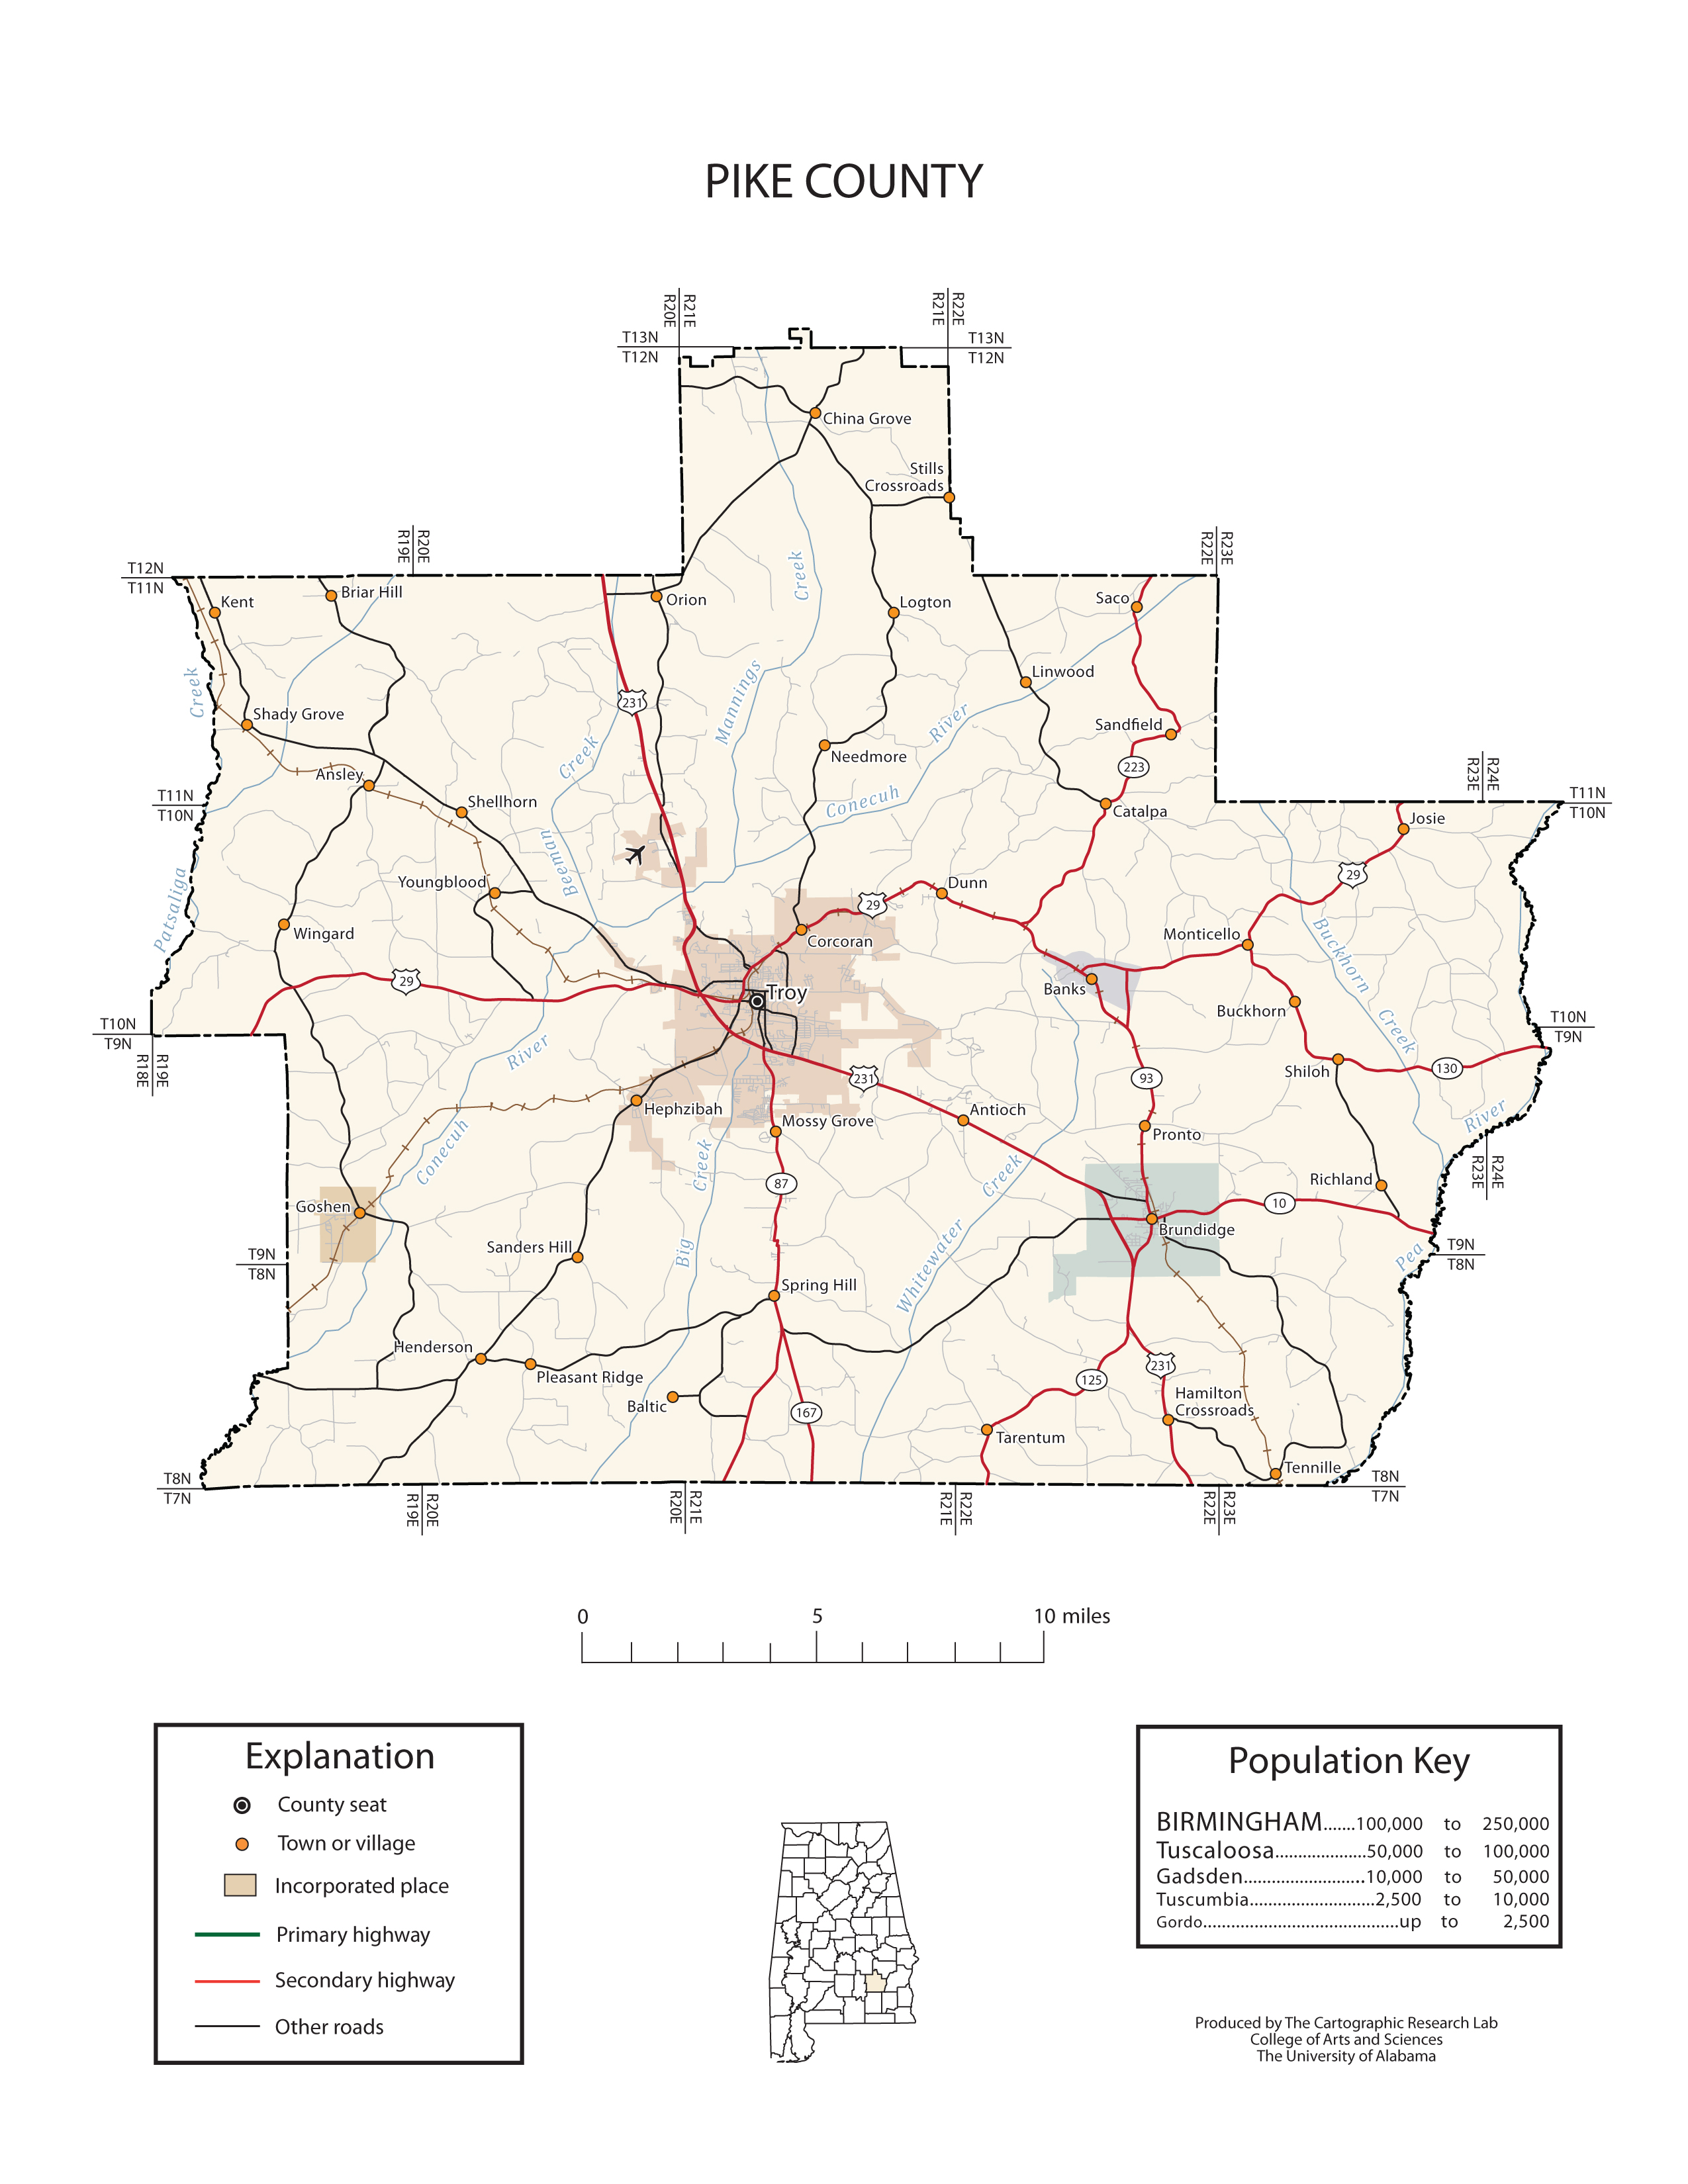 Maps of Pike County